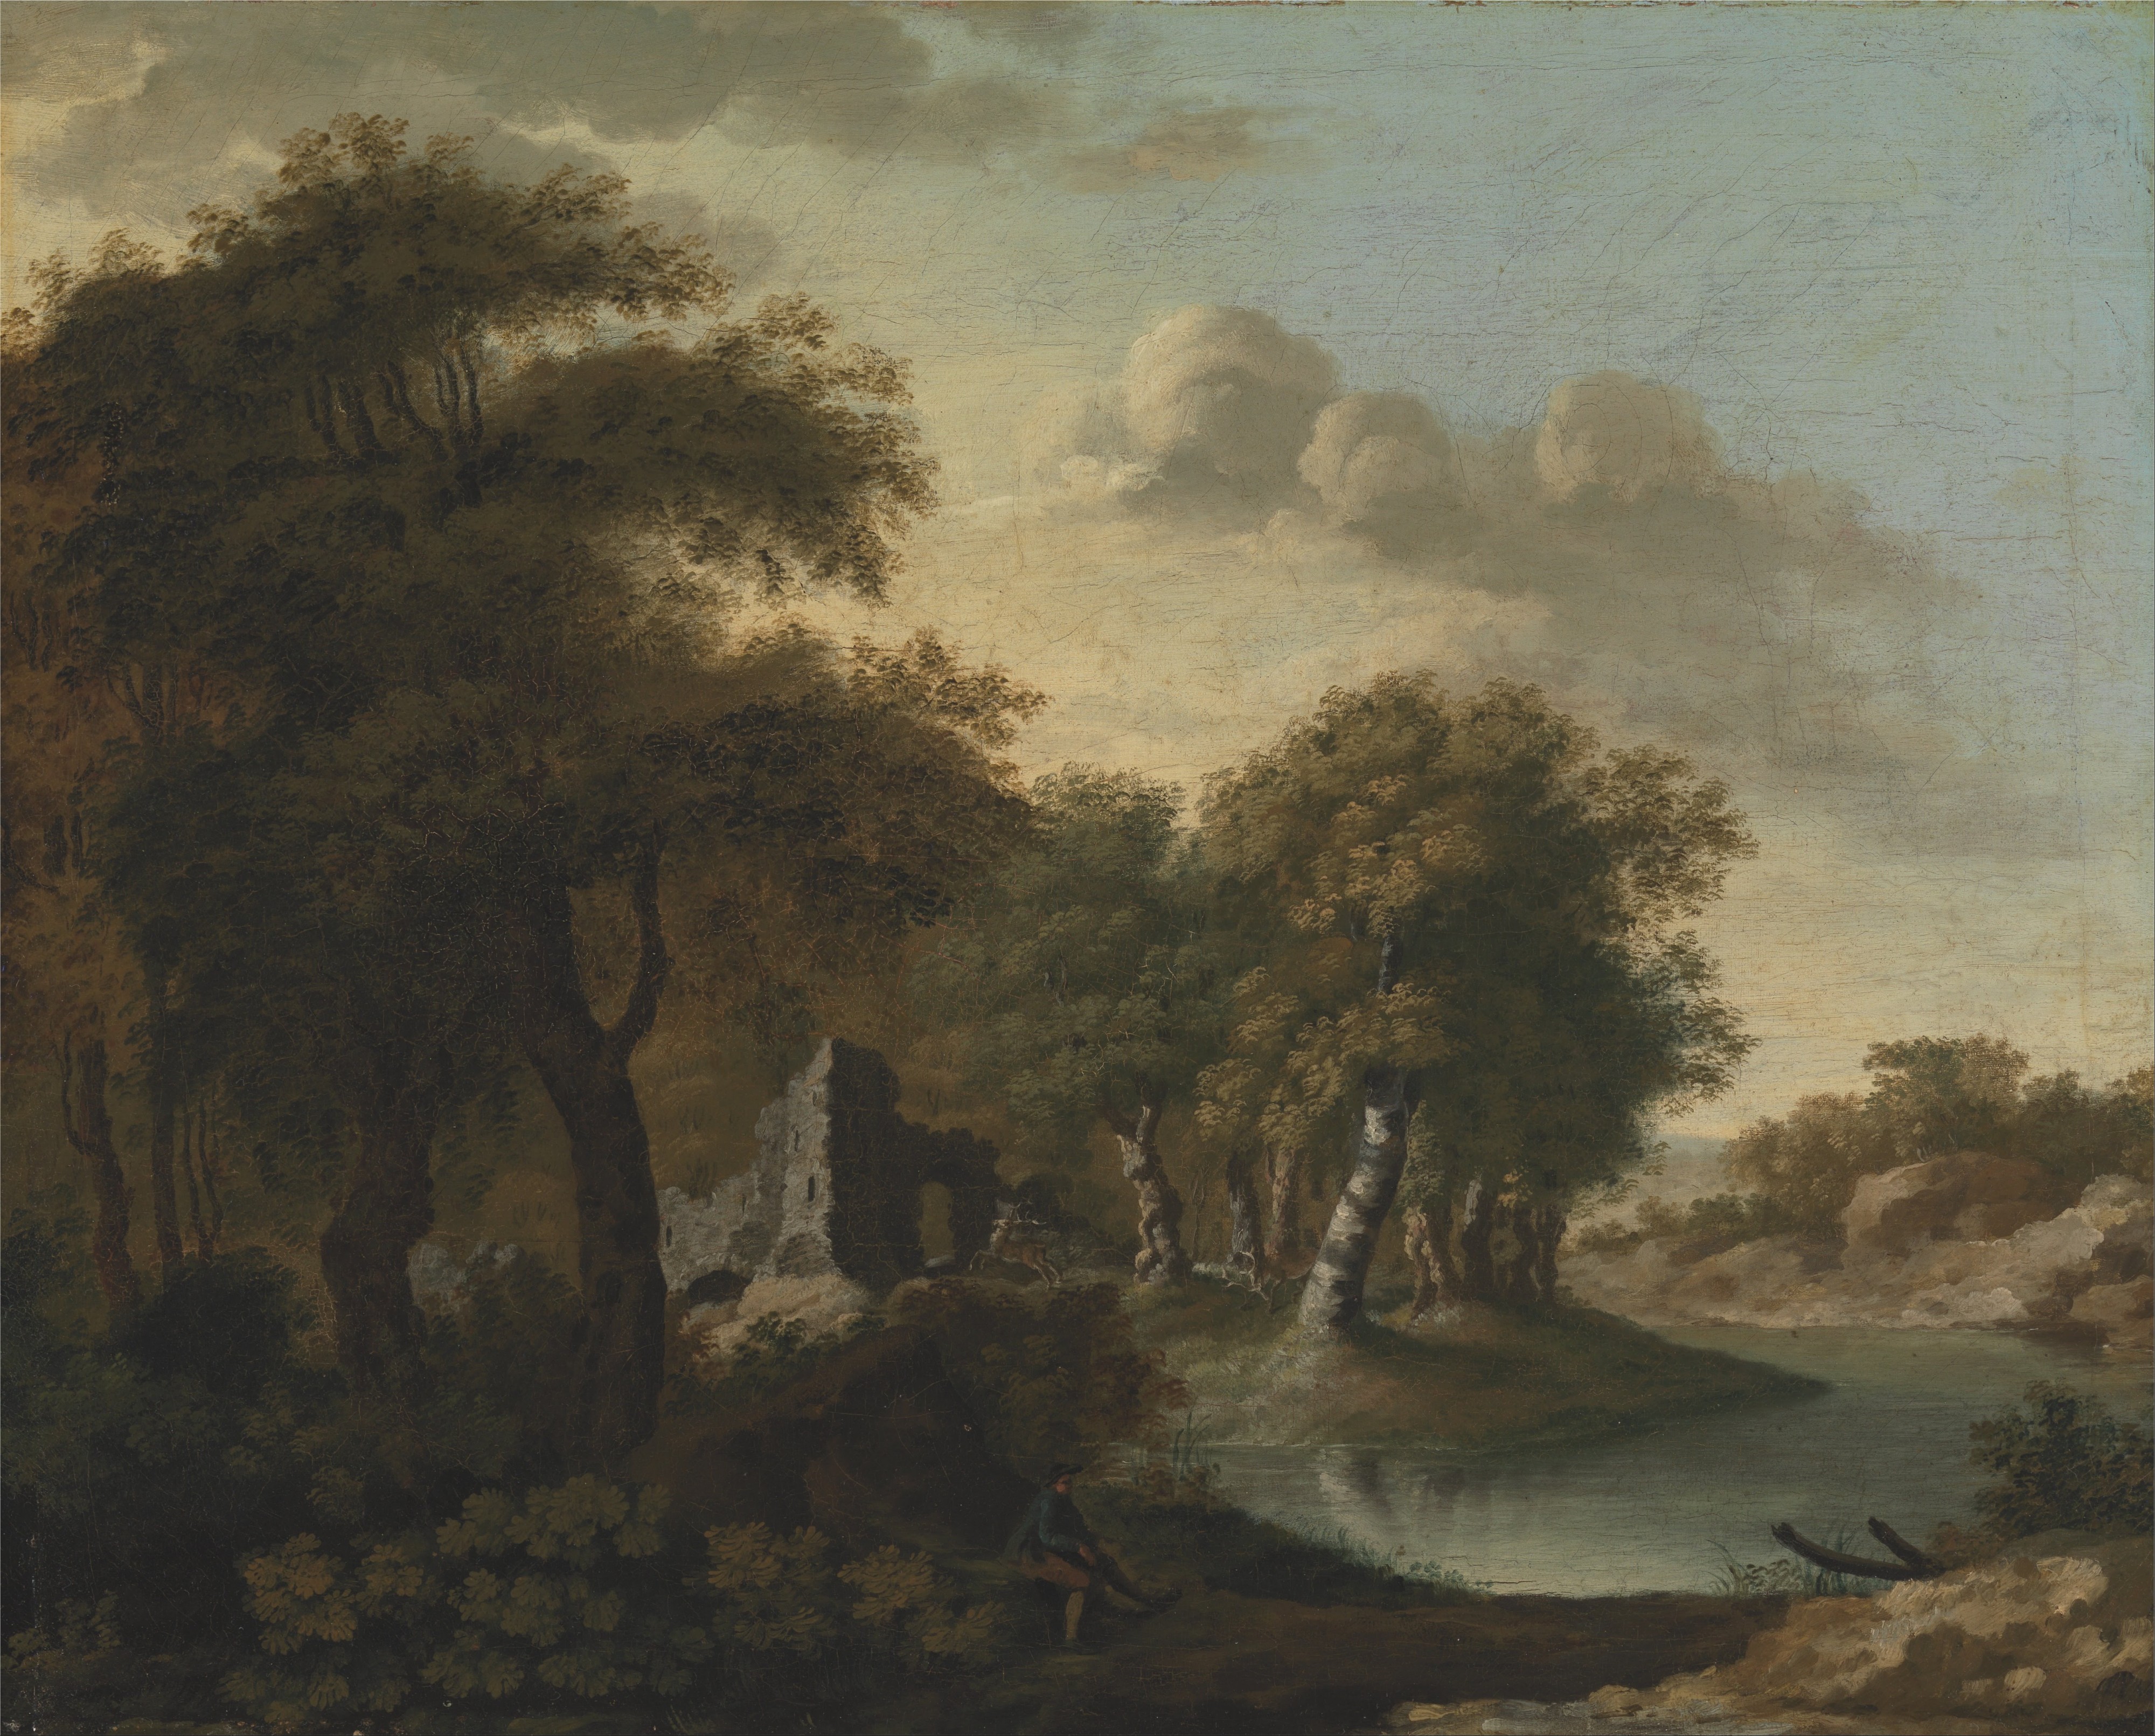 George Smith - A View Near Arundel, Sussex, with Ruins by Water - Google Art Project